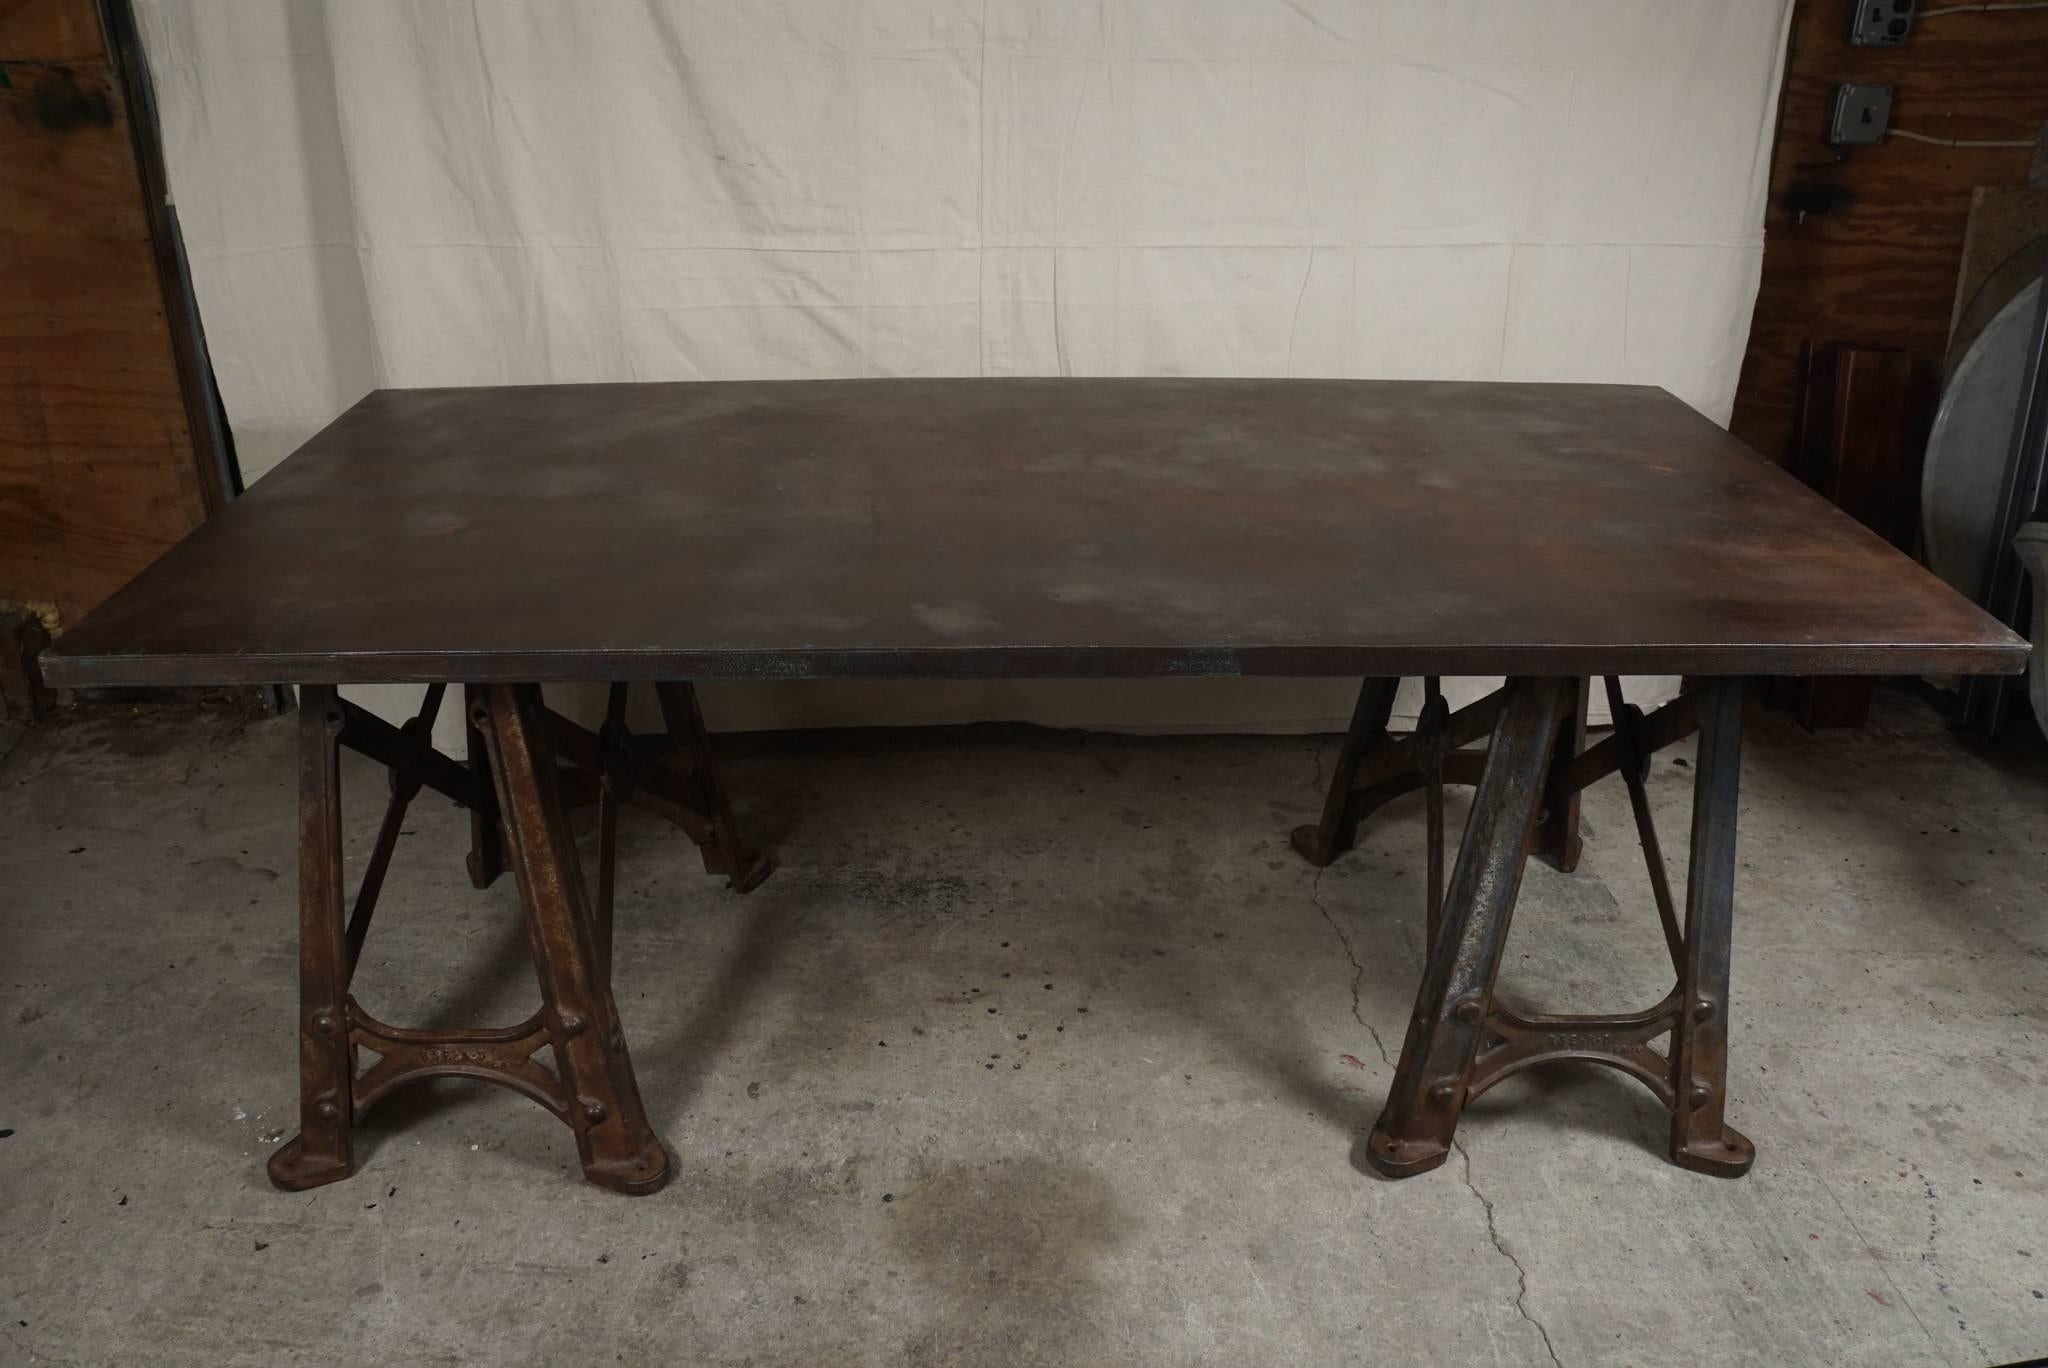 This very good table has all the elements associated with the finest of industrial furniture. Conceived at a time, circa 1890-1900 when art and industry were combined to create modern wonders of the age and who’s ideals had the intent of recreating